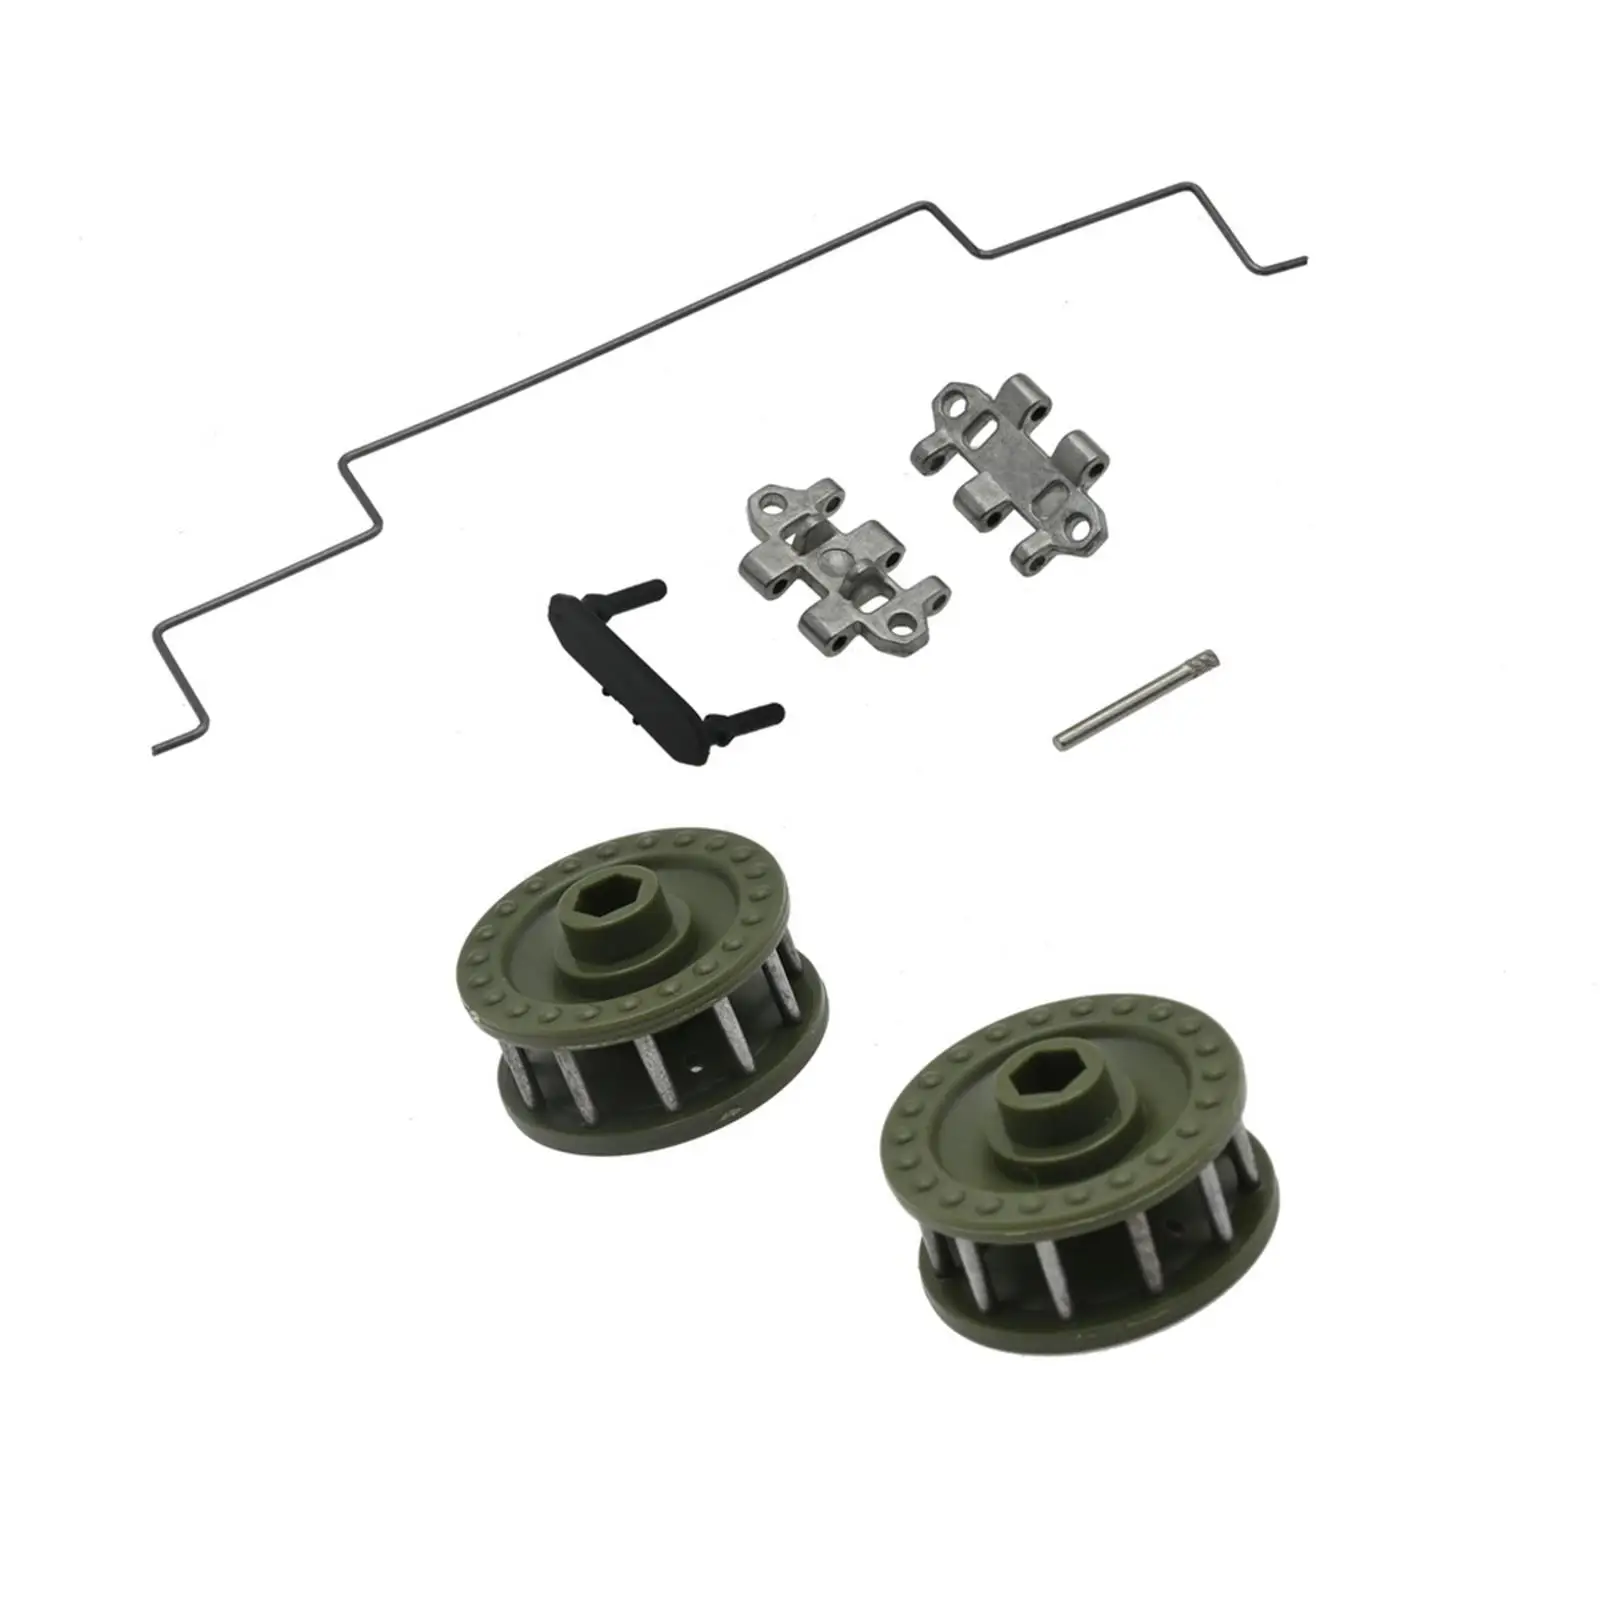 1/16 RC Track Accessory Accesories Replace Parts for Tracked Vehicle